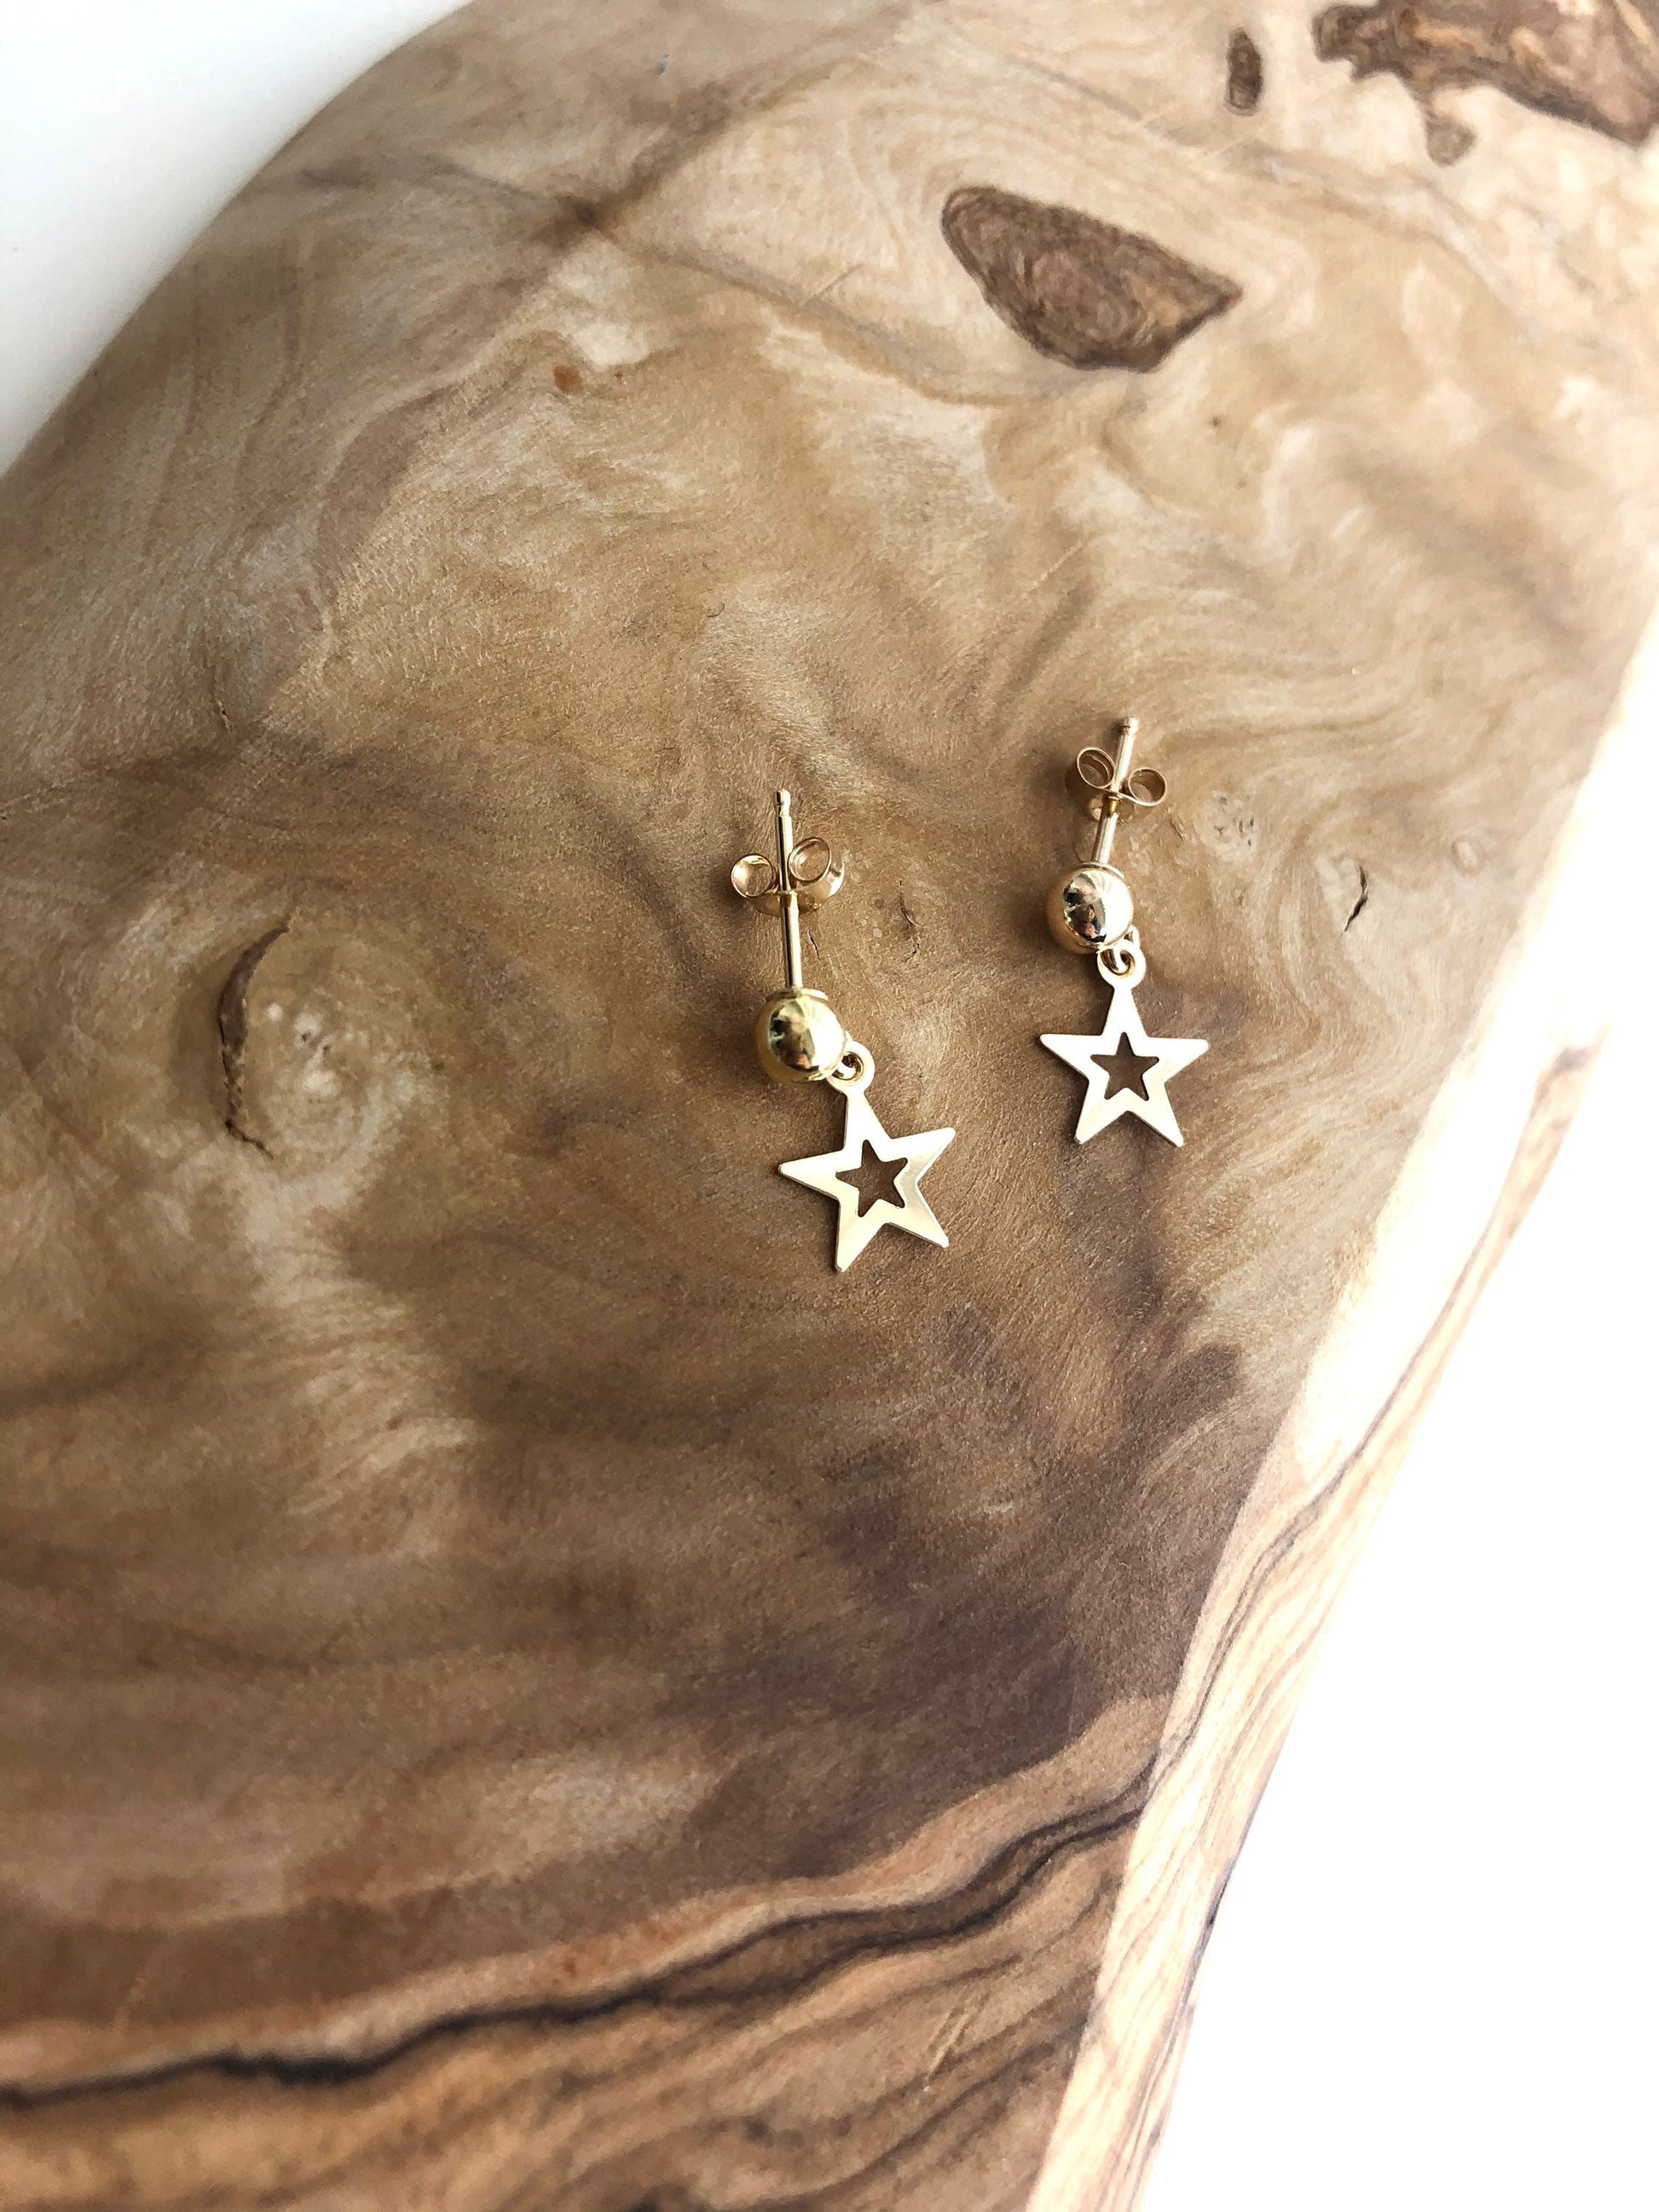 14k Gold Filled Tarnish Resistant, Ball Studs With Cut Out Stars, Everyday Minimalist Classic Ball Stud Earrings For Men & Women - sjewellery|sara jewellery shop toronto